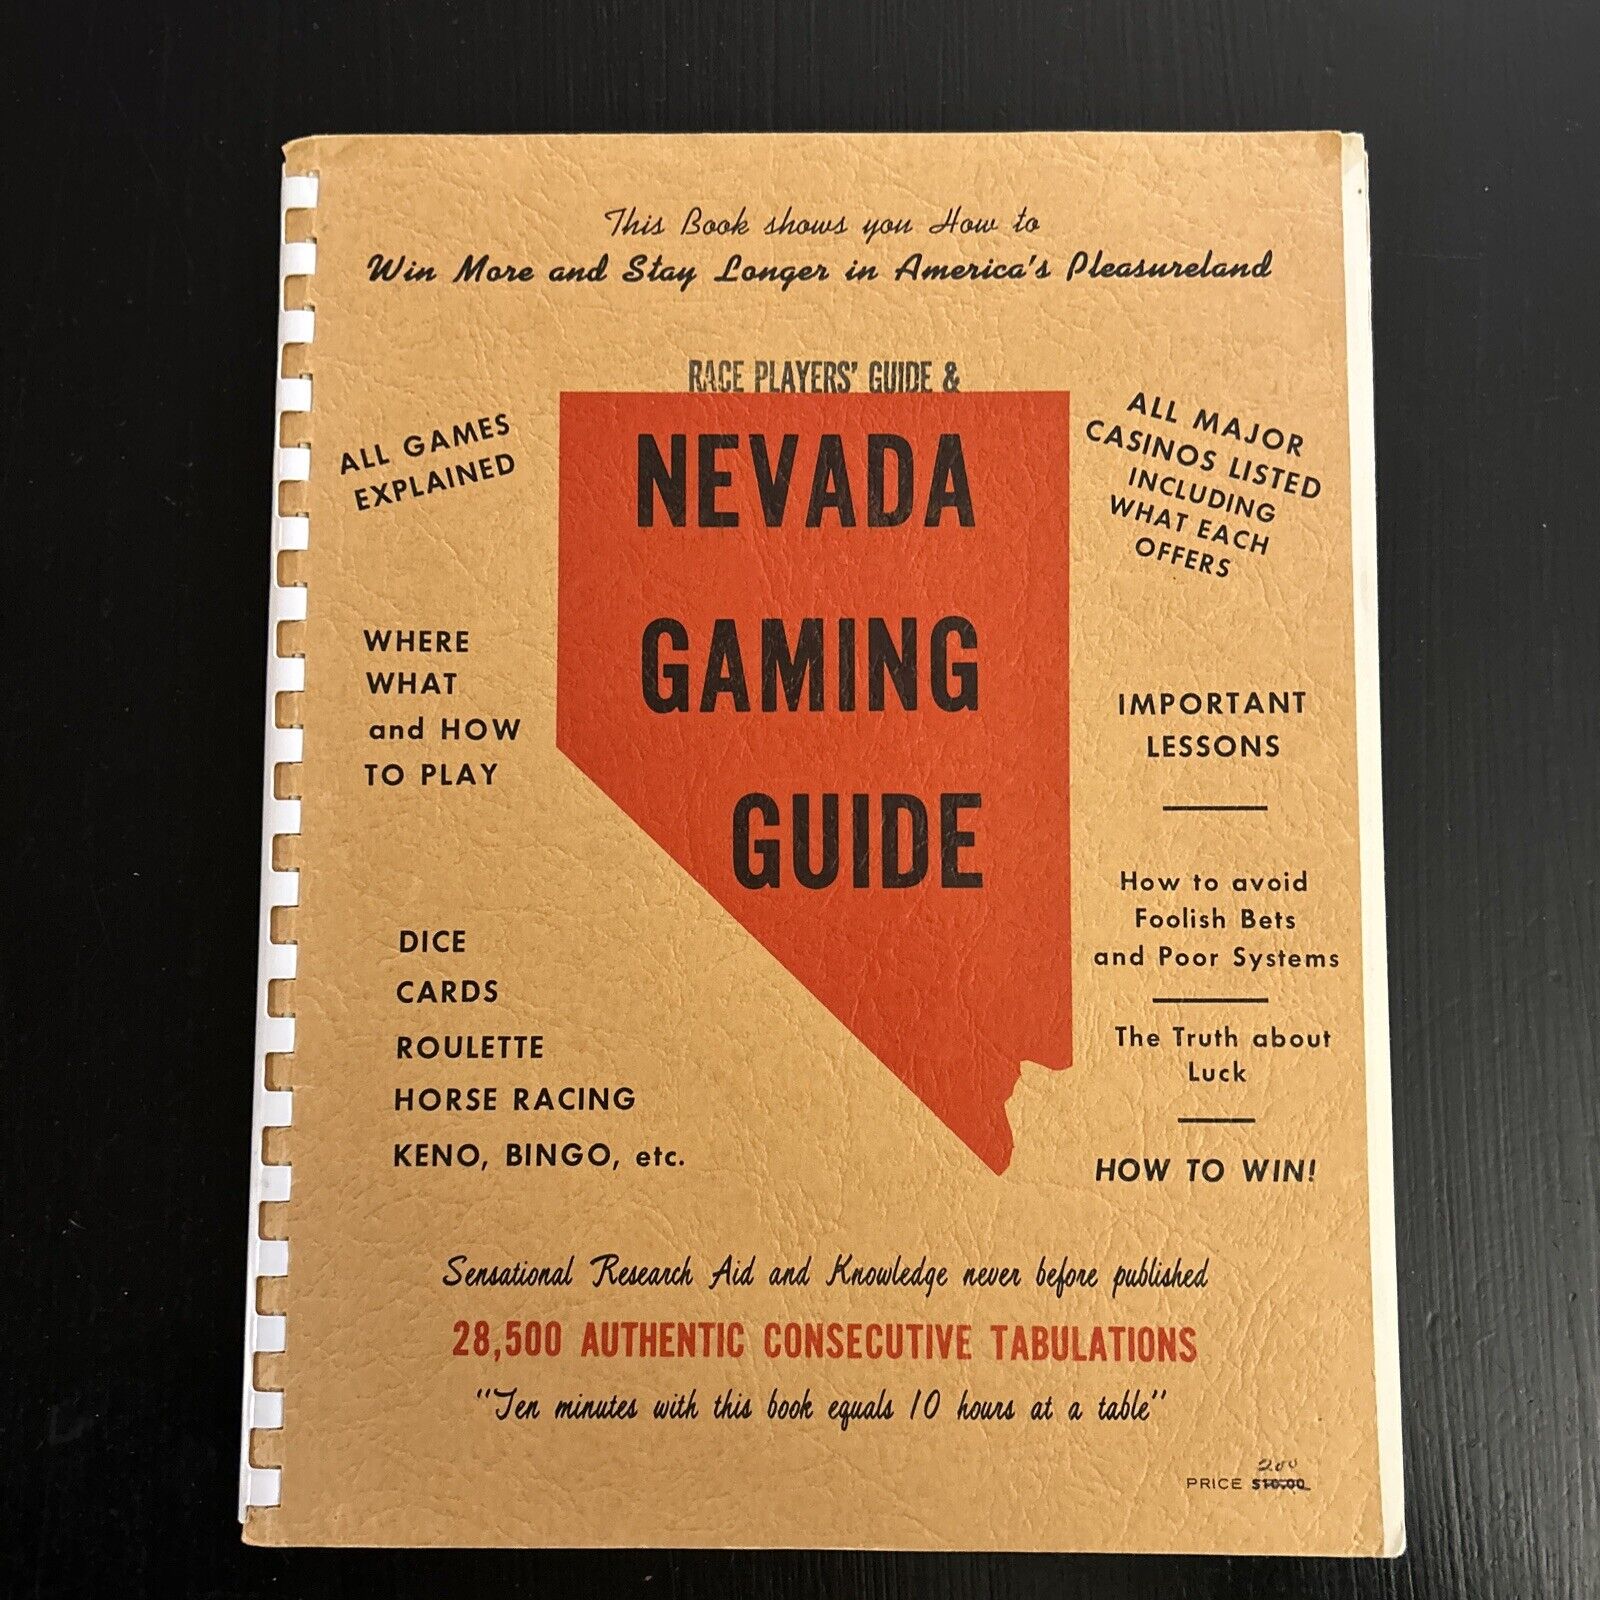 Rare 1965 Nevada Gaming Guide & Race Players’ Guide By Louis G Holloway